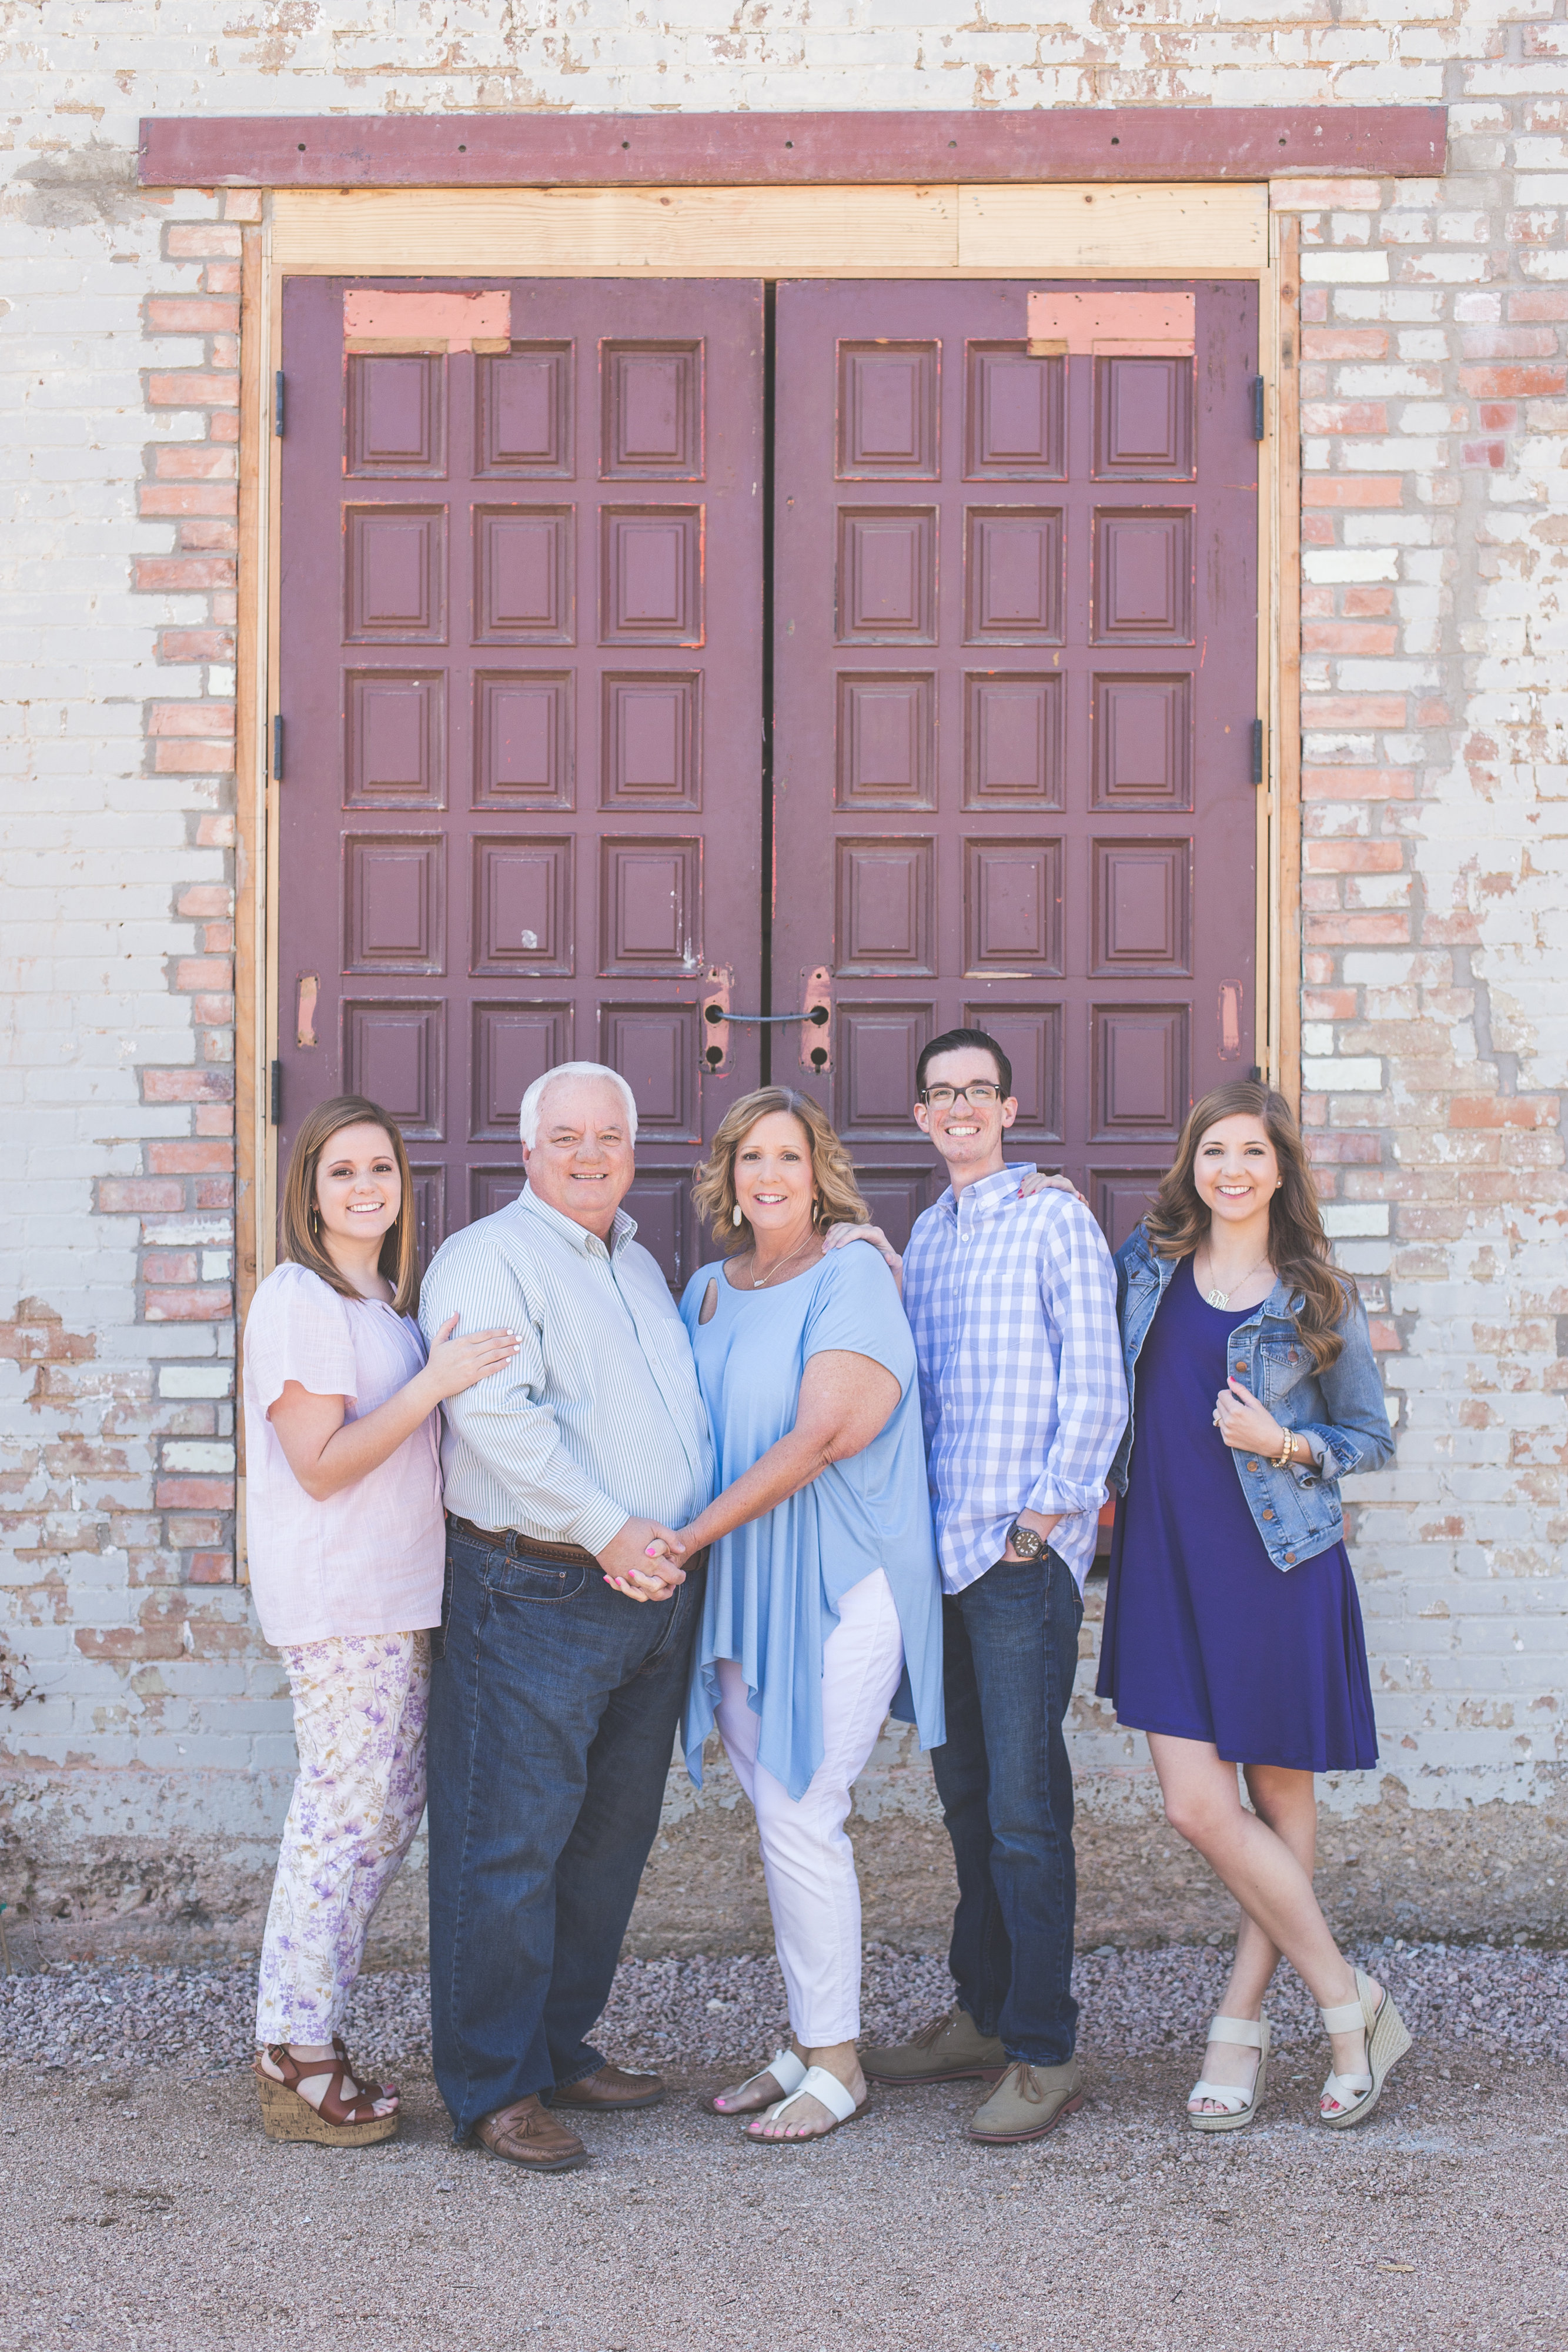 View More: http://margodawnphotography.pass.us/taylor-family